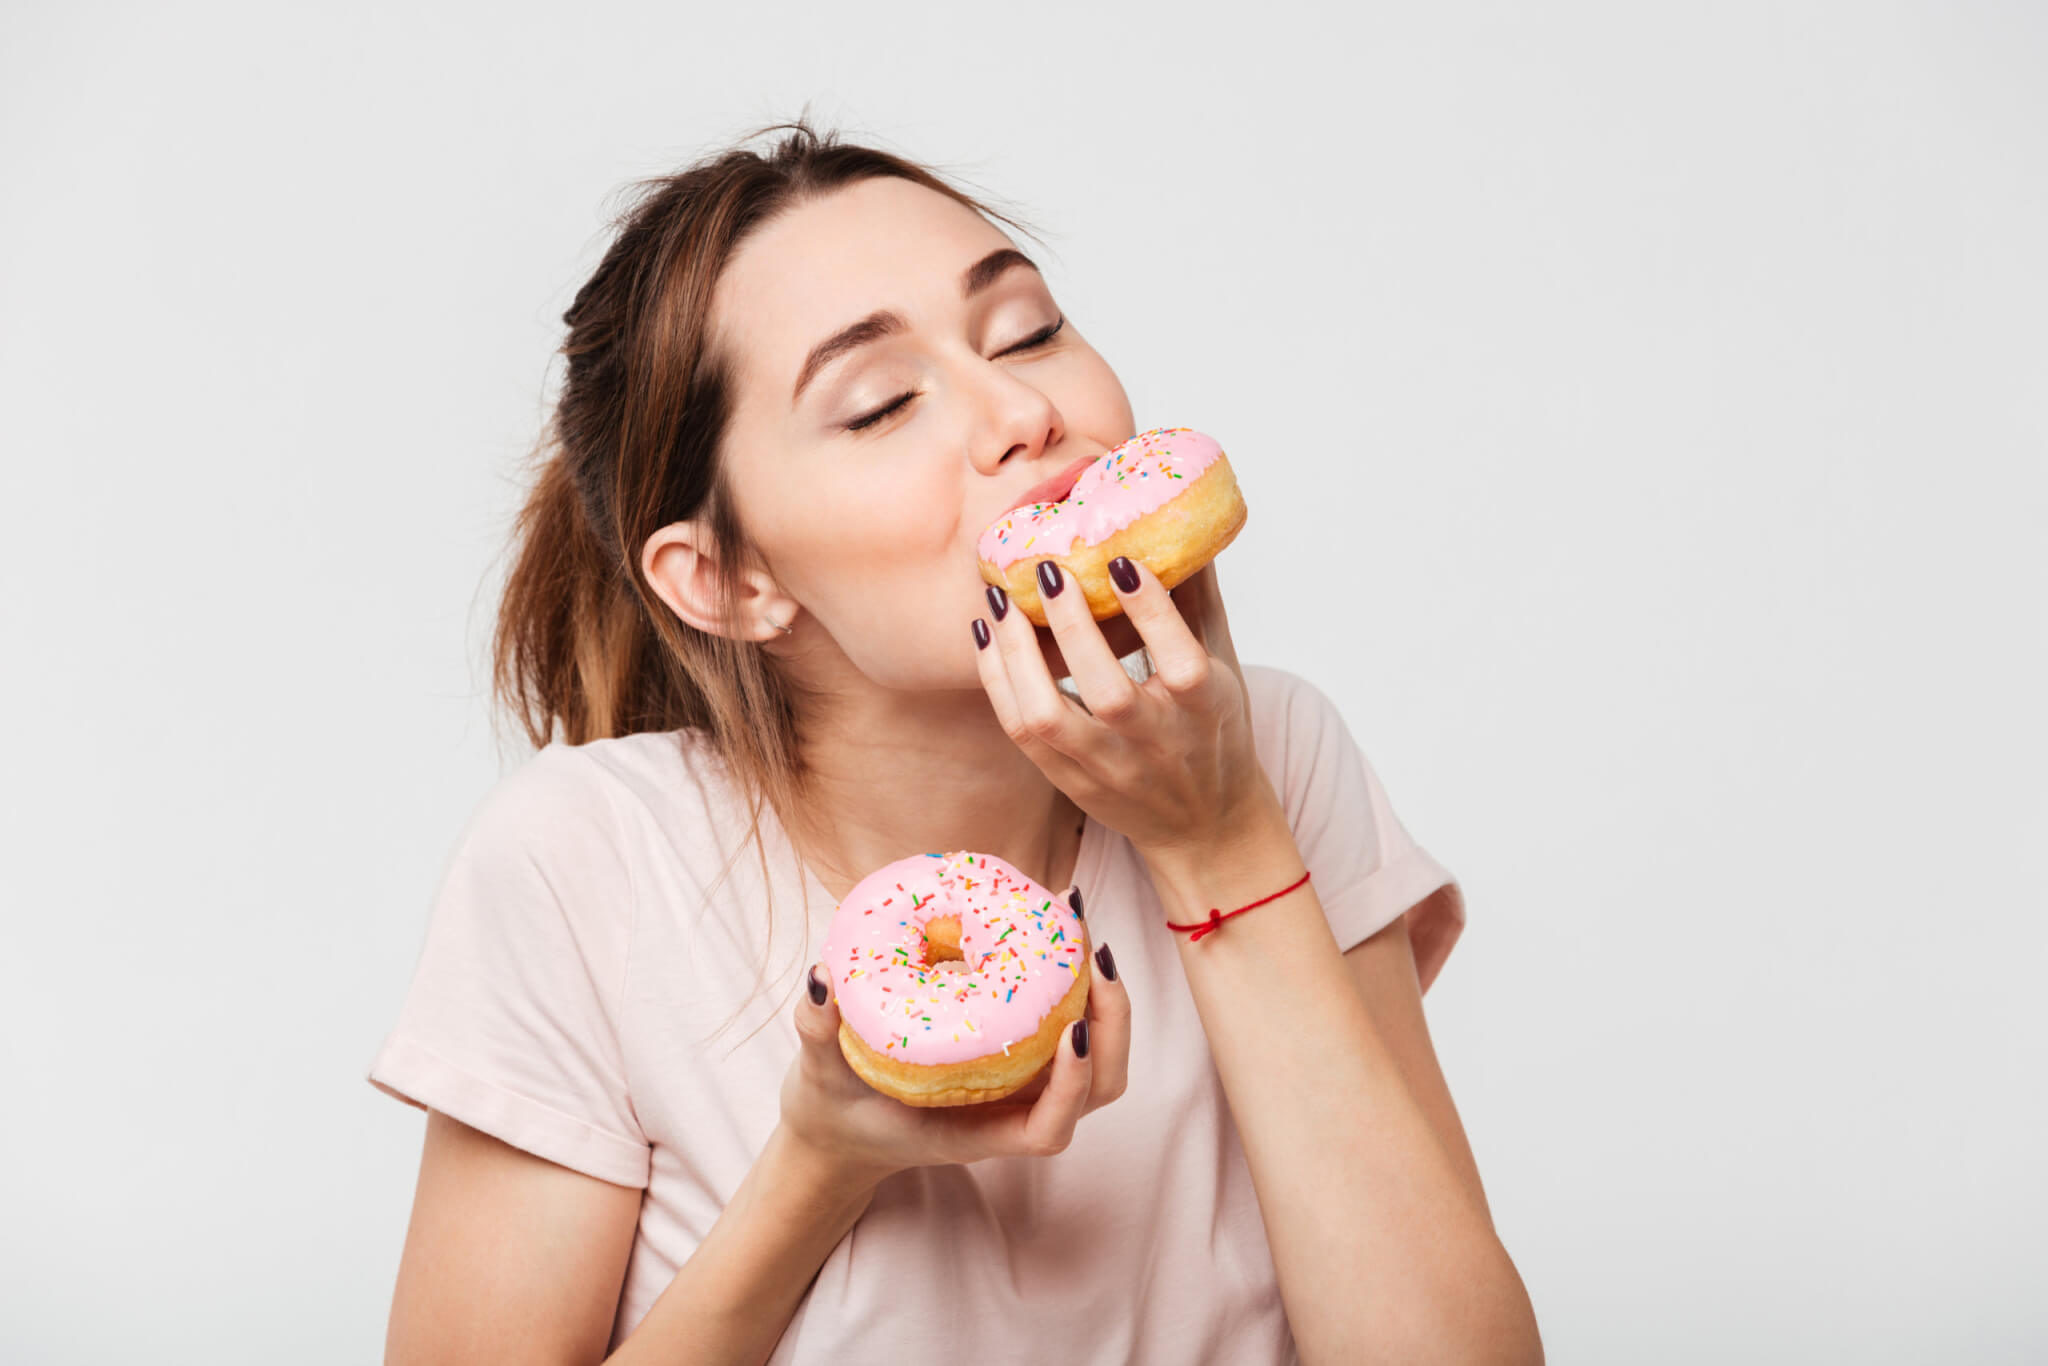 A Dietitian’s Take: The 4 Best Ways To Crush Sugar Cravings